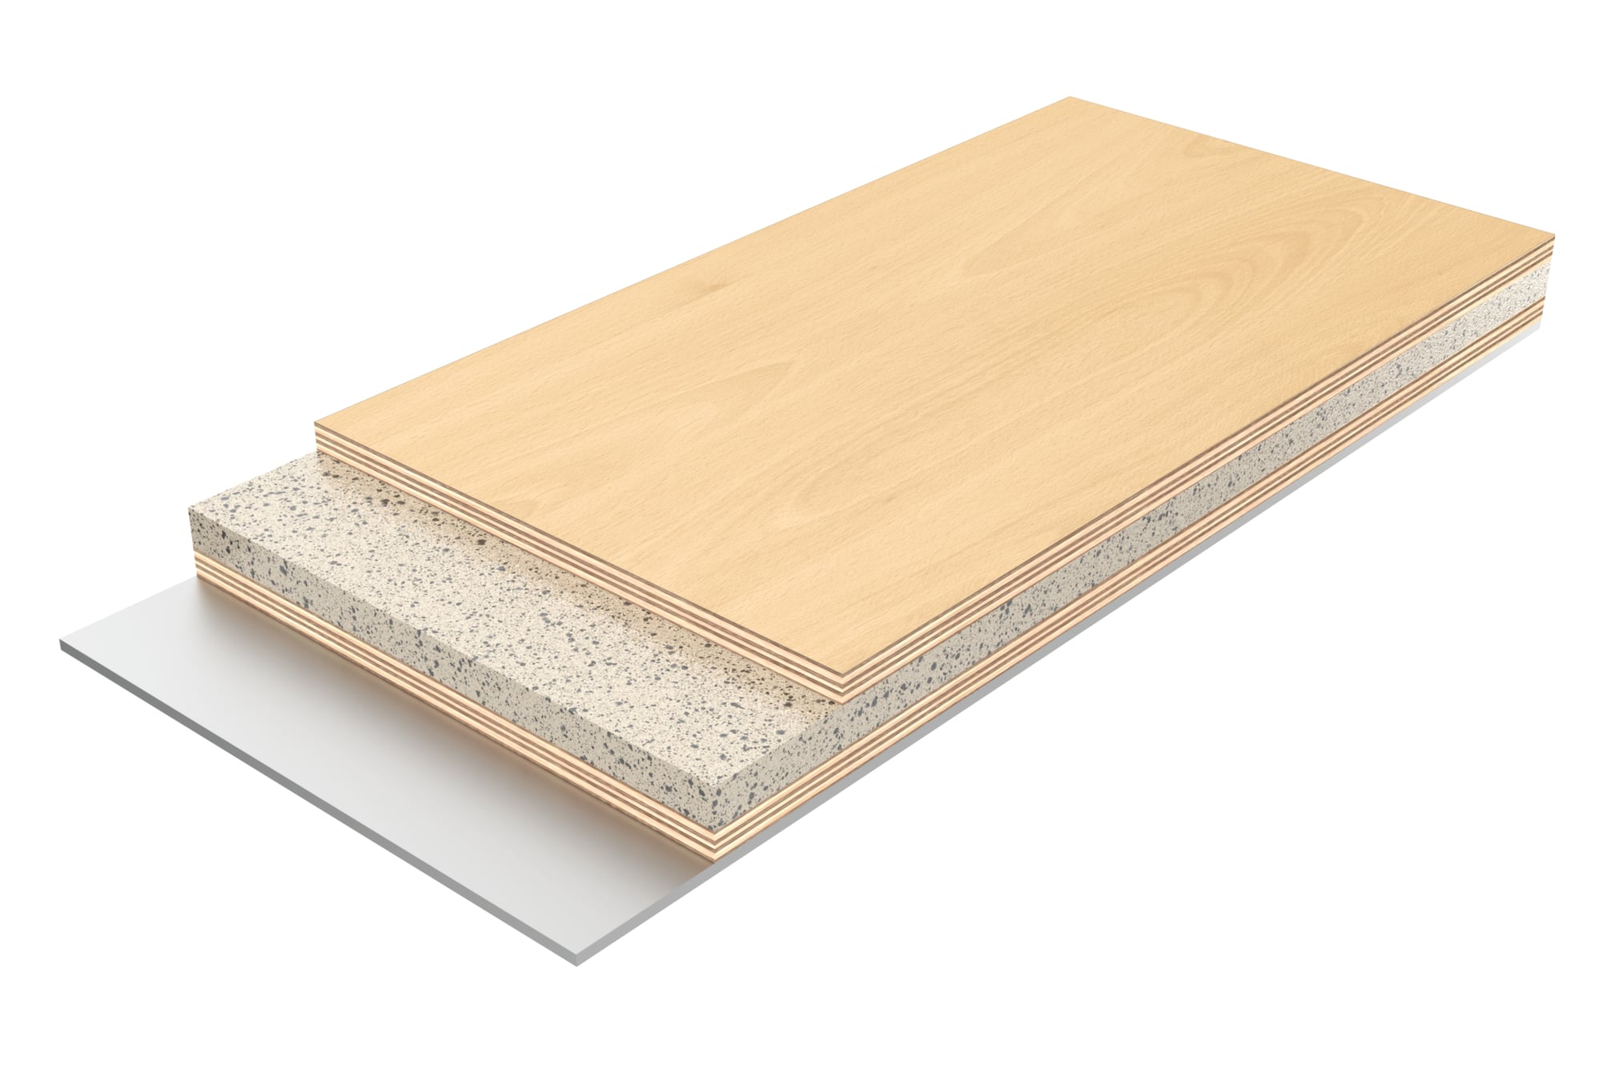 technology, interior, new cork hybrid will make noise insulation more sustainable